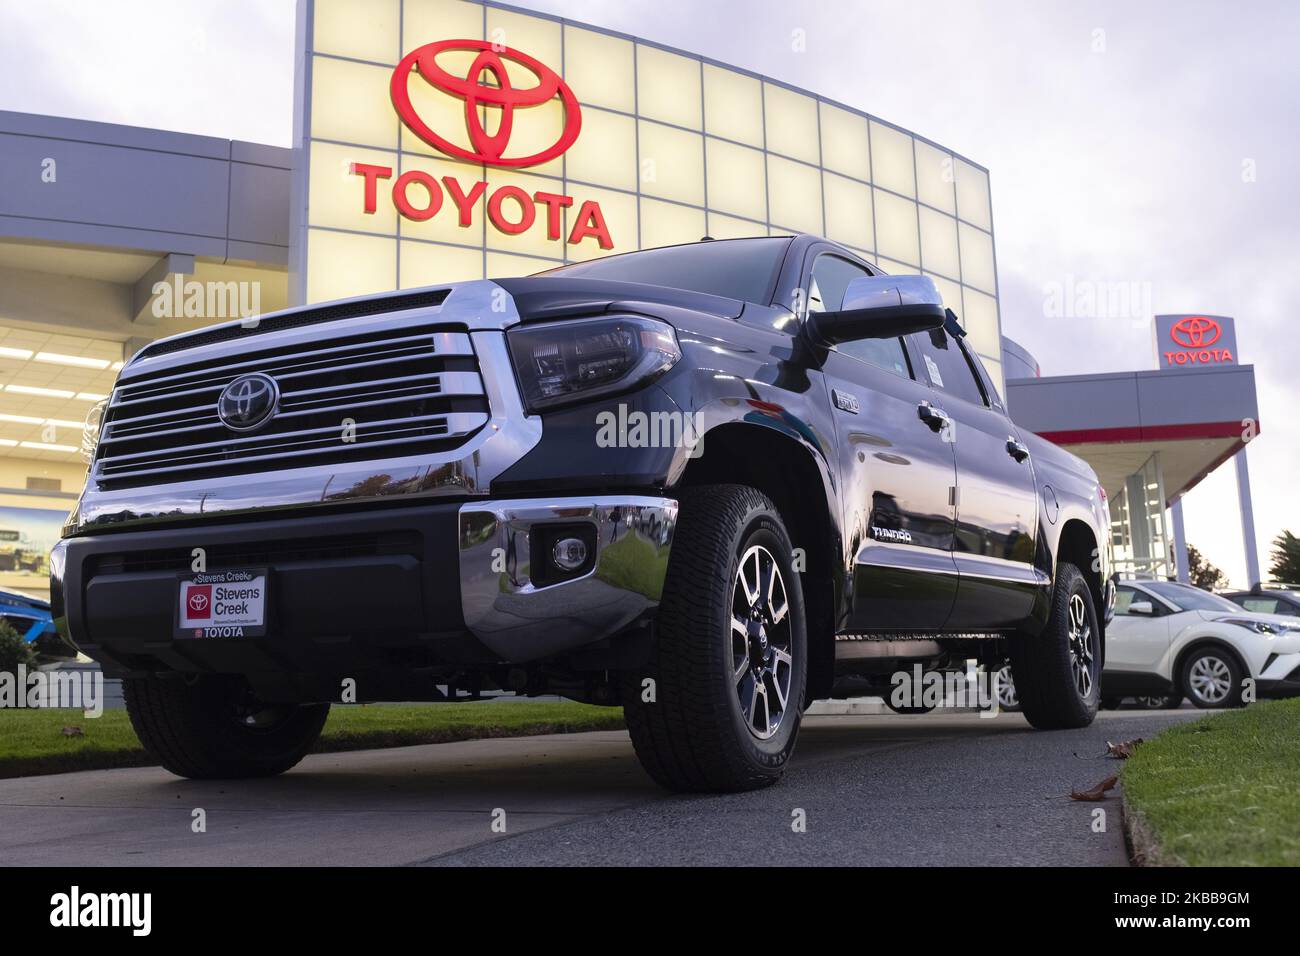 A Toyota Tundra pickup truck is seen at a car dealership in San Jose, California, United States on Tuesday, November 19, 2019. Toyota has supported President Donald Trump's plan to bar California from setting its own vehicle emissions rules. California governor Gavin Newsom said on Monday it will halt all purchases of new vehicles for state government fleets from GM, Toyota and Fiat Chrysler. (Photo by Yichuan Cao/NurPhoto) Stock Photo